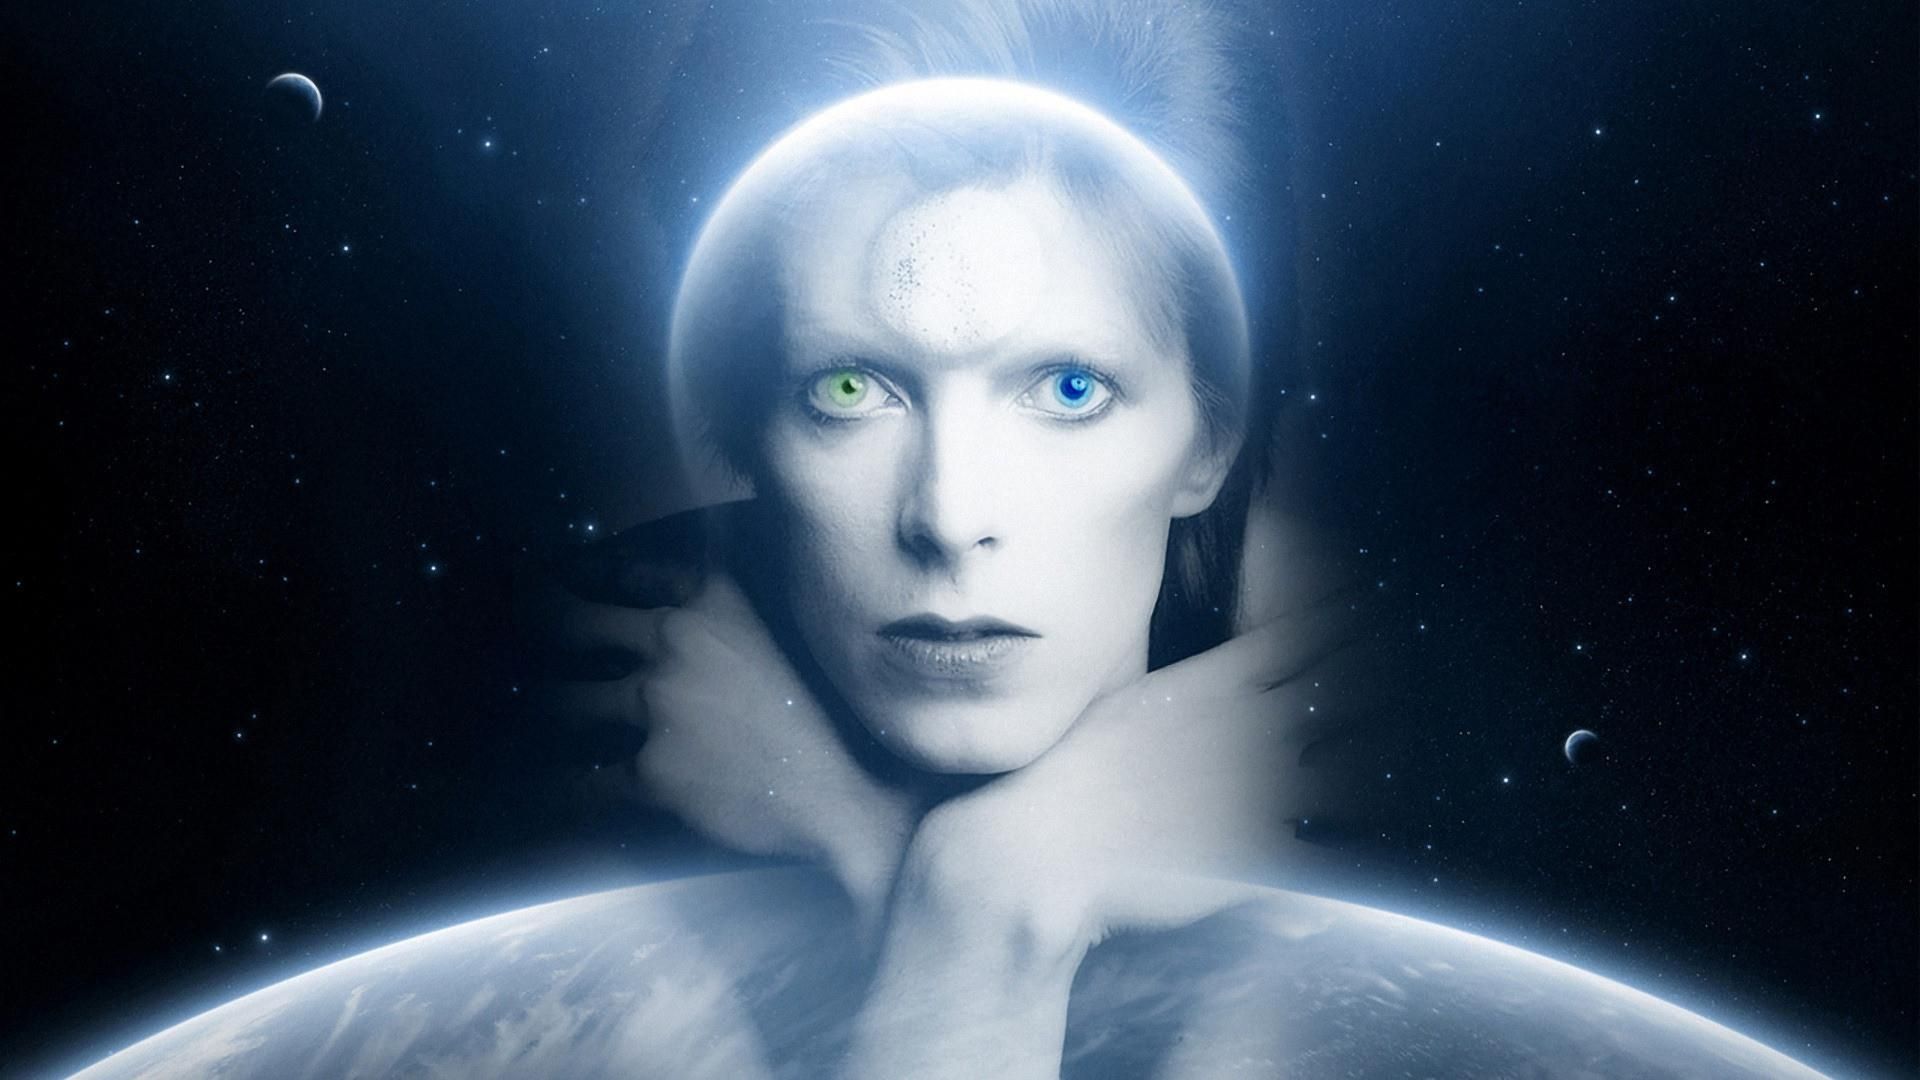 The Man Who Fell to Earth background